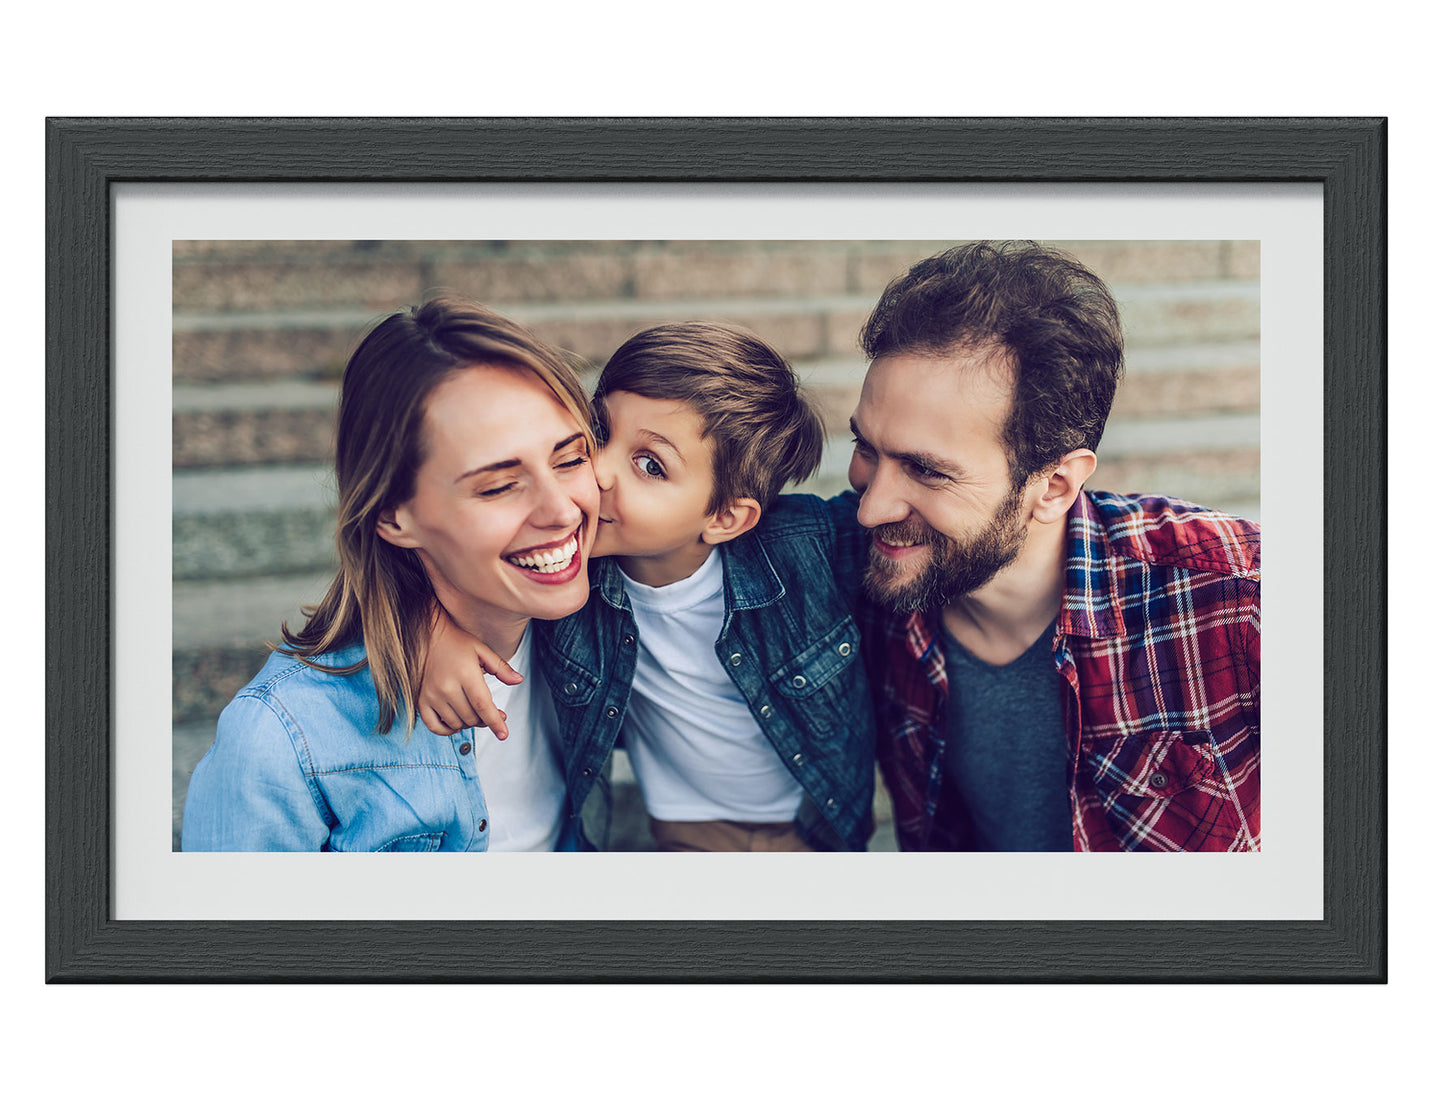 15.6-inch Frameo Wi-Fi Digital Photo Frame - White Border with 3 Interchangeable Frames Included. Oak, Black and White